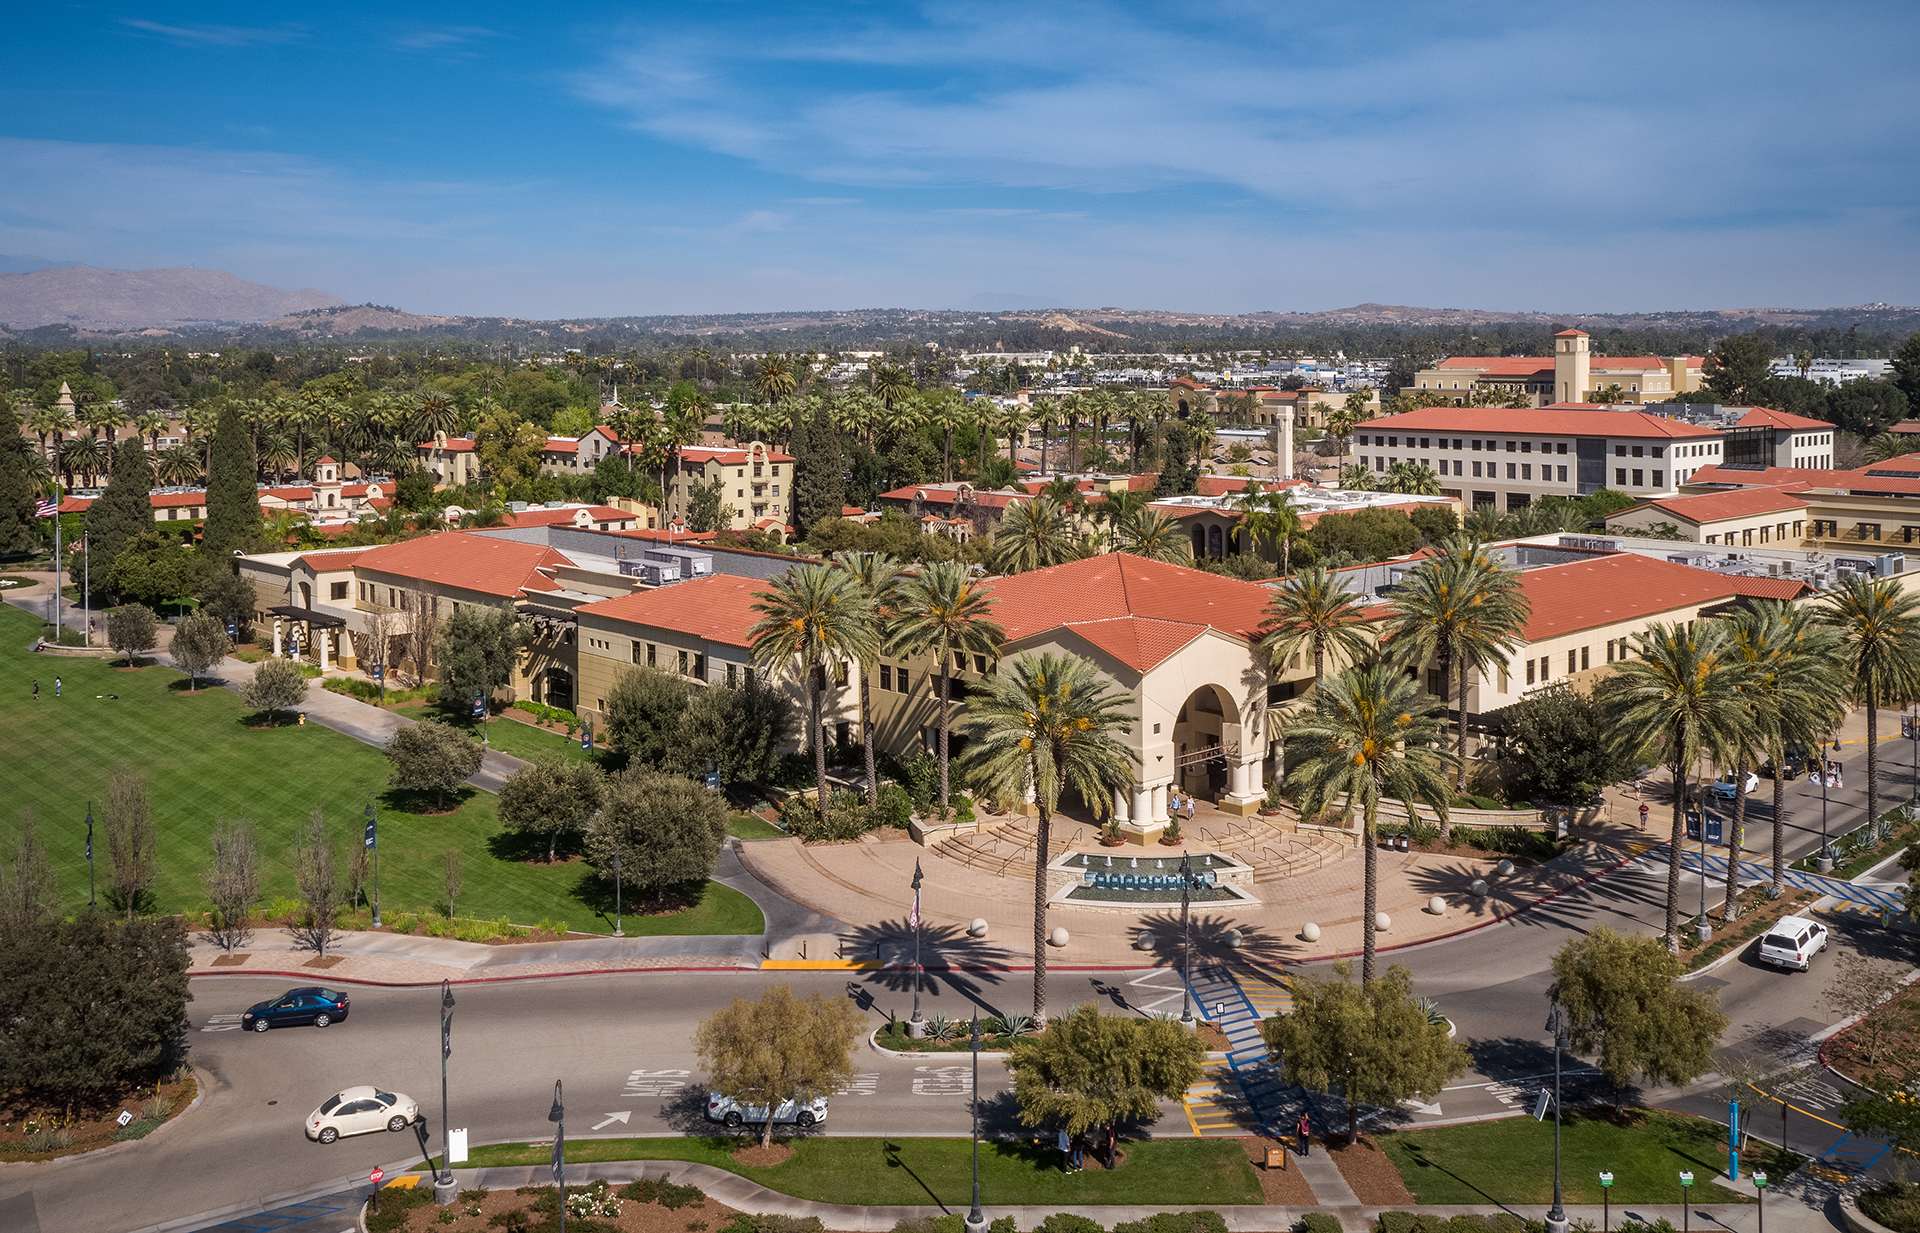 Riverside, Calif. (Sept. 27, 2019) — Fall 2019 enrollment at California Baptist University set another record with 11,045 students, an increase of 5.3 percent over the previous year, President Ronald L. Ellis announced today. The increase numbered 559 more students than the previous record 10,486 enrollment in 2018, Ellis said. He noted that the 2019 full time equivalent (FTE) enrollment figure of 11,391 is 744 FTE’s or seven percent greater than the 2019 figure. Ellis announced the latest record enrollment at the regular fall meeting of the CBU Board of Trustees. The triple-digit enrollment growth in 2019 follows three years of 600-plus increases (610, 698, 618), one four-digit increase of 1,113, and four 3-digit increases of 813, 584, 616 and 784. “Add the current year increase of 559 and over the last 10 years CBU enrollment has grown 6,940 on a base of 4,105 in fall 2009—a 169 percent increase in 10 years,” Ellis declared. During its 69-year history, California Baptist University has seen 19 triple-digit or greater year-over-year increases—all of them occurring since fall 1995. Since Ellis became president in November 1994, CBU enrollment has grown from 808 to 11,045, an increase of 10,237, which is 13.67 times larger. “Fall 2019 is another record breaking enrollment increase on top of a sustained 25 years of significant increases,” Ellis told the trustees. “It puts CBU ahead of schedule to attain the 12,000 by 2025 goal.”  Founded in 1950, CBU is a private comprehensive Christian university located in Riverside, Calif. and affiliated with the California Southern Baptist Convention. CBU is a member of the Council for Christian Colleges and Universities, the Association of Independent California Colleges and Universities, and the International Association of Baptist Colleges and Universities.